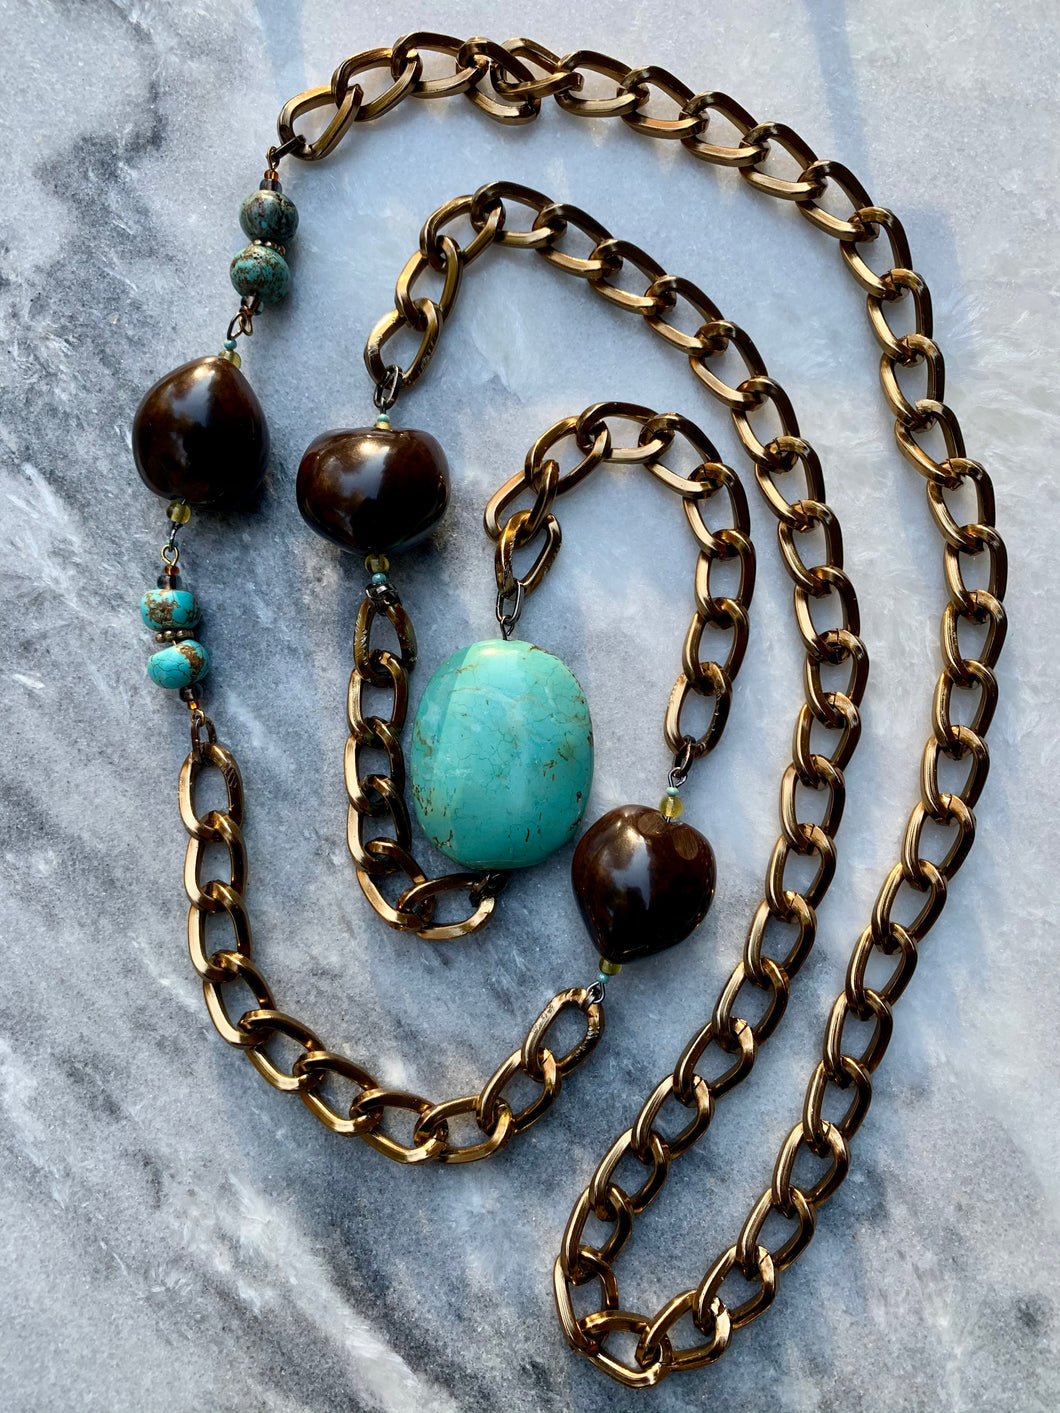 Howlite Turquoise, Brown Nut Shell, Antique Brass Plated Chain